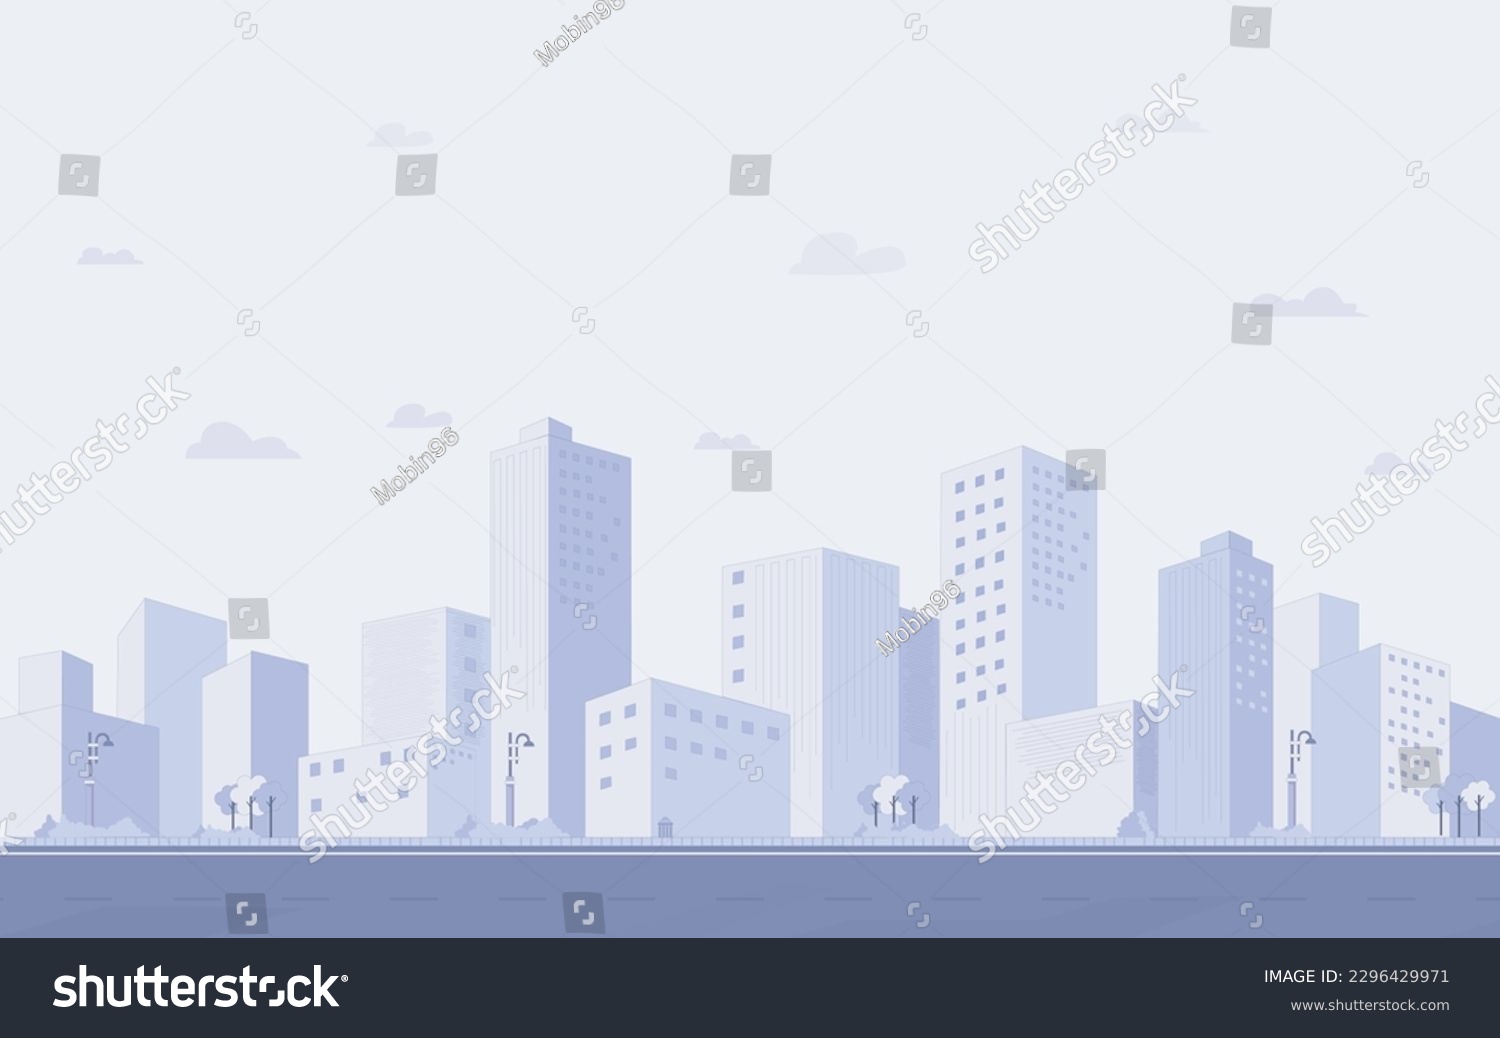 Purple cityscape background, City buildings and trees at city view. Monochrome urban landscape with clouds in the sky. Modern architectural flat style vector illustration. #2296429971